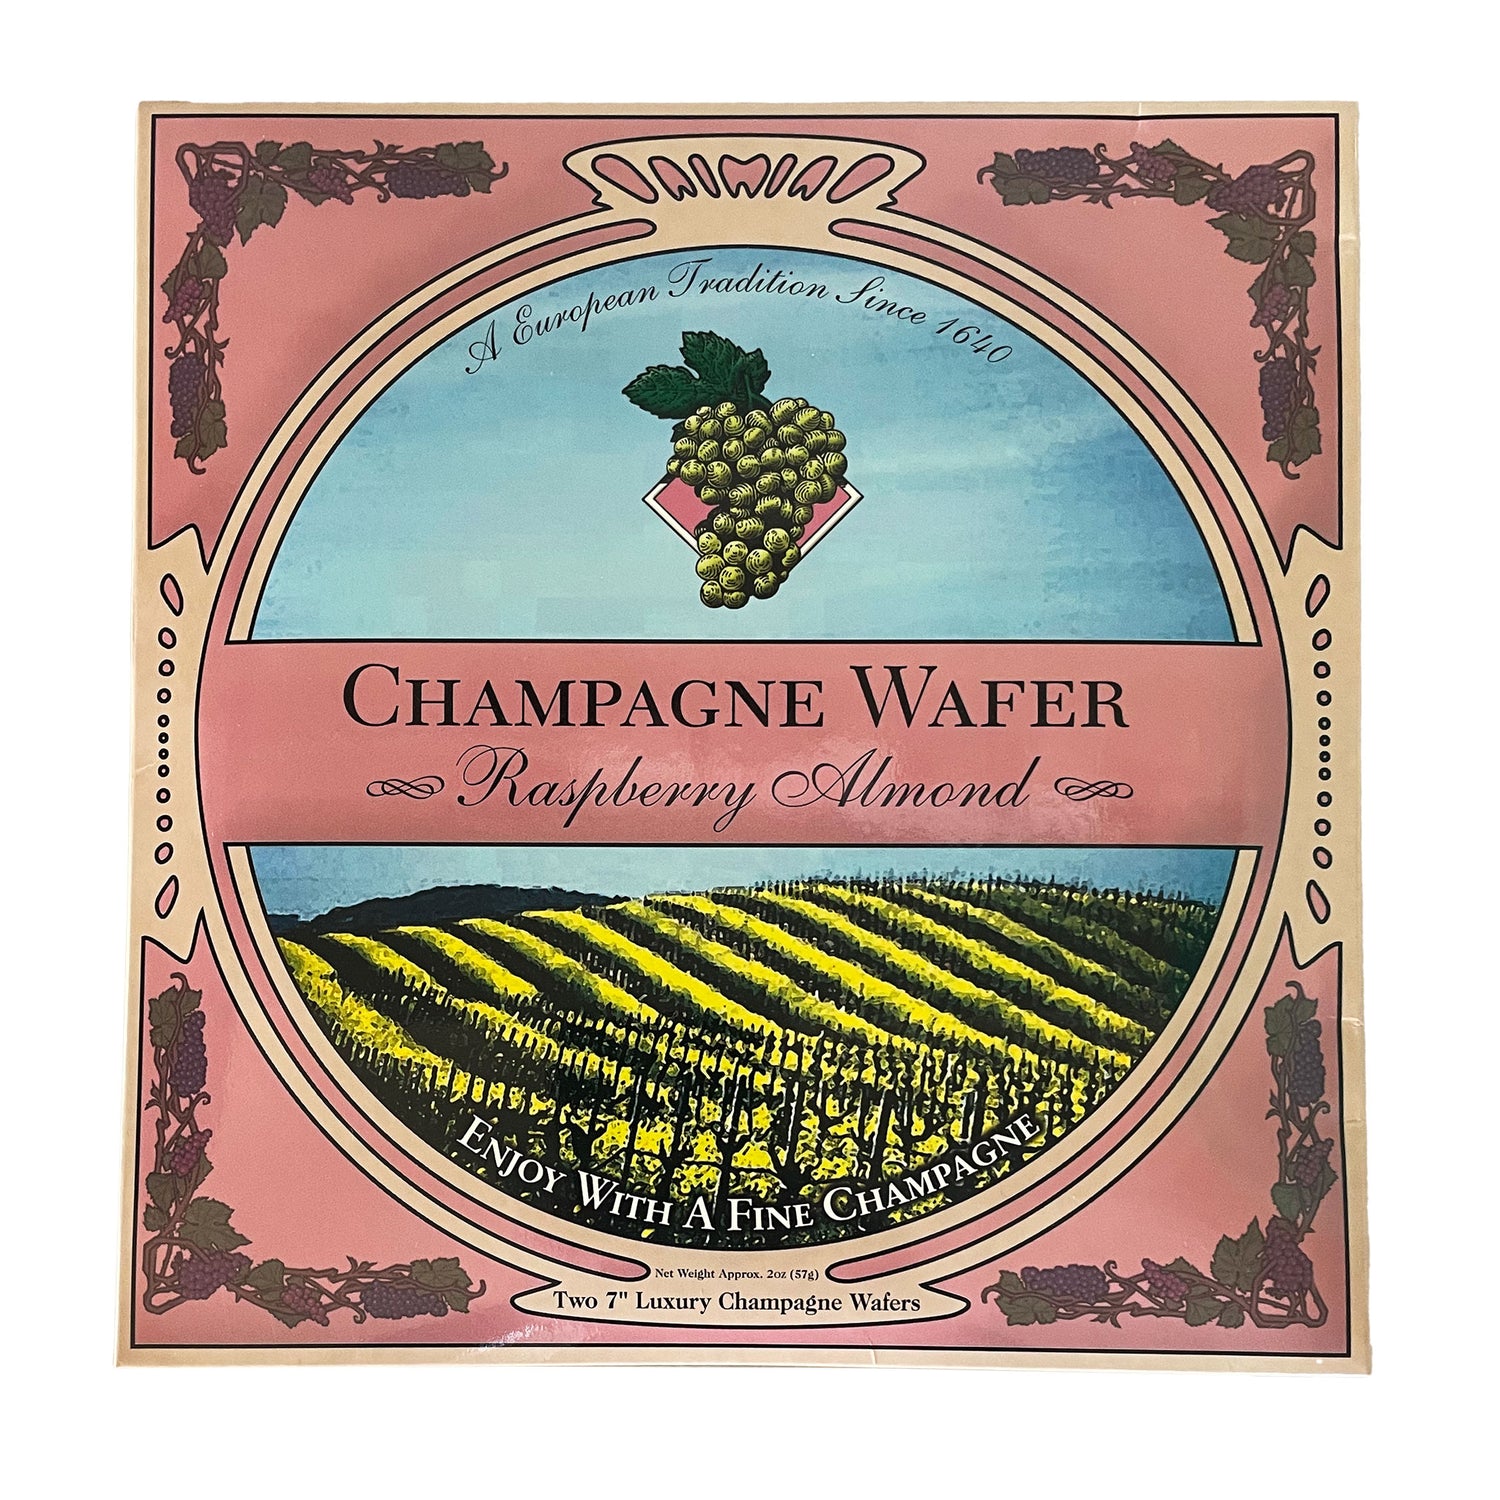 Champagne Wafers Small Pack: Raspberry Almond (2 Wafers)